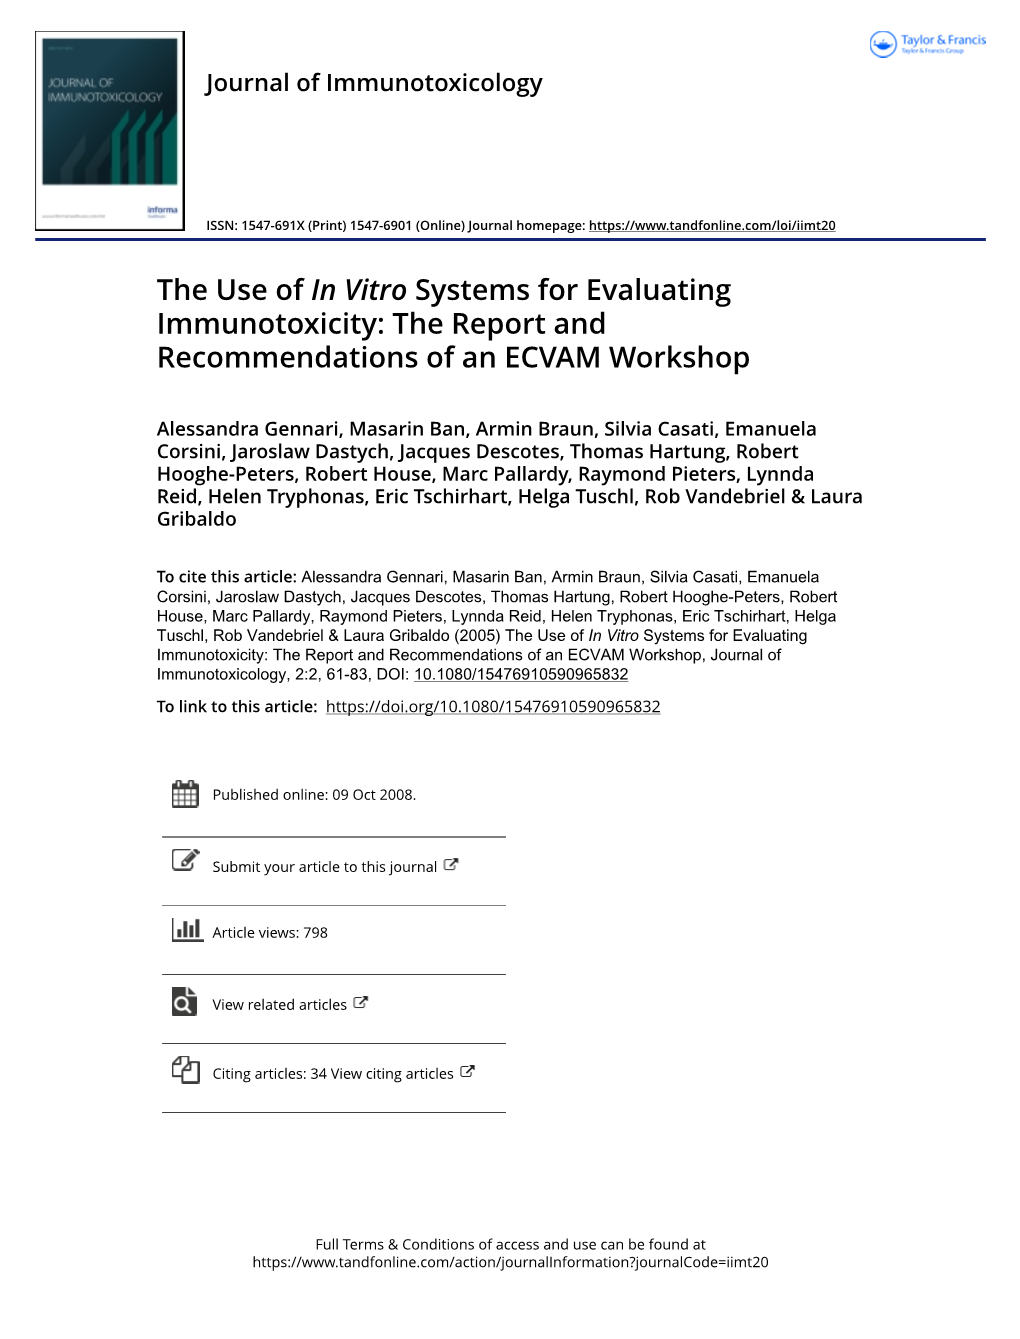 The Use of in Vitro Systems for Evaluating Immunotoxicity: the Report and Recommendations of an ECVAM Workshop